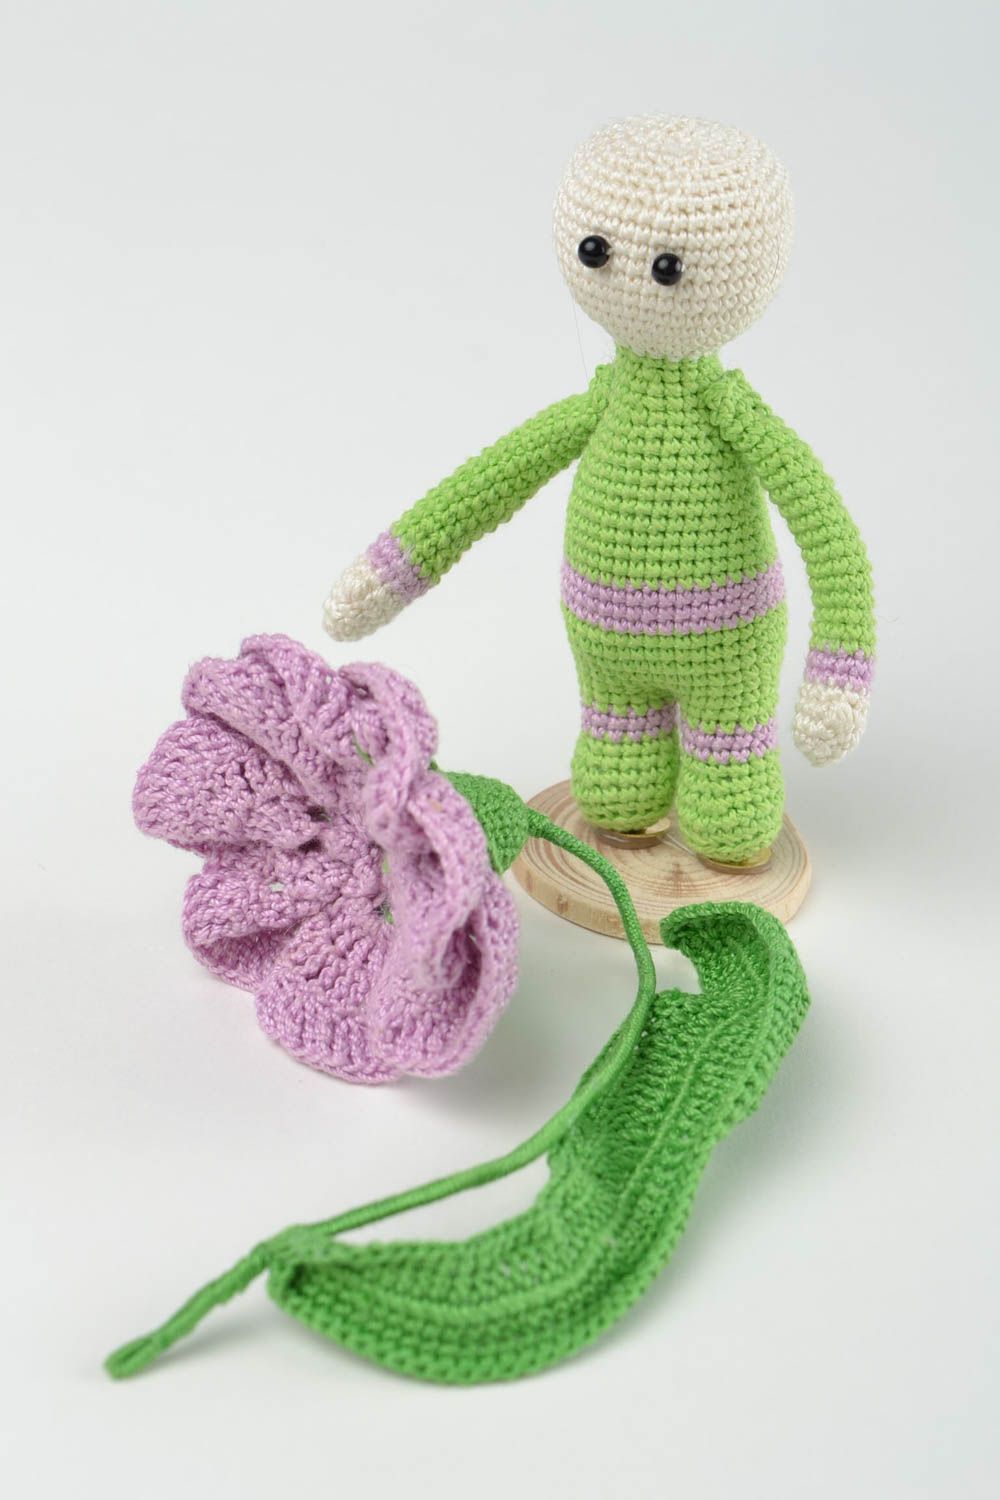 Handmade toy designer toy gift for baby crochet toy gift ideas baby toy photo 2